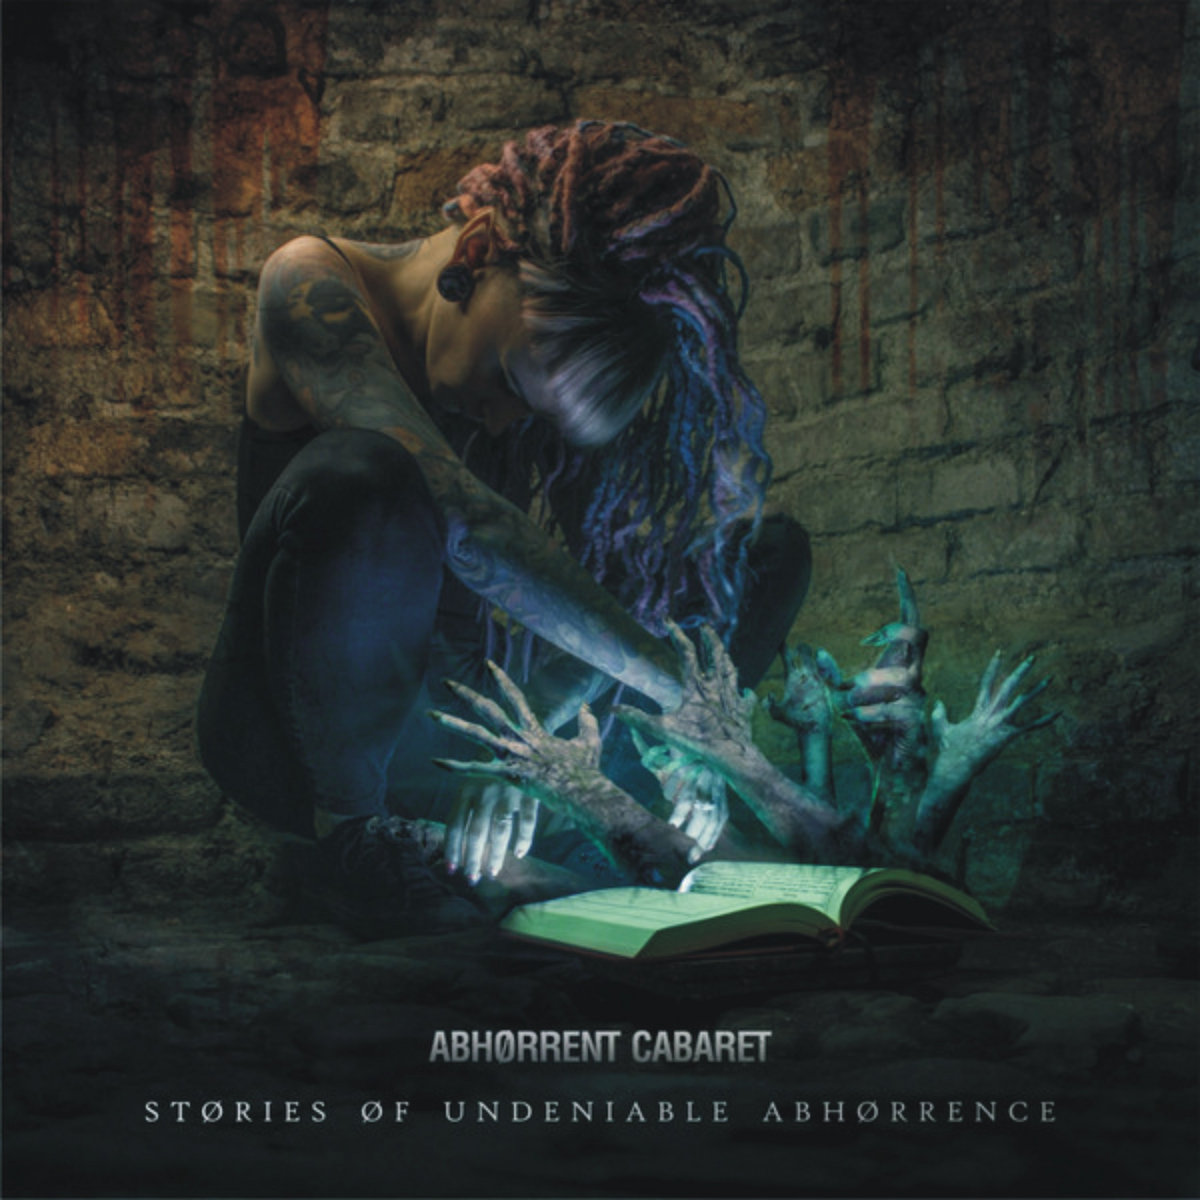 ABHORRENT CABARET - "STORIES OF UNDENIABLE ABHORRENCE"